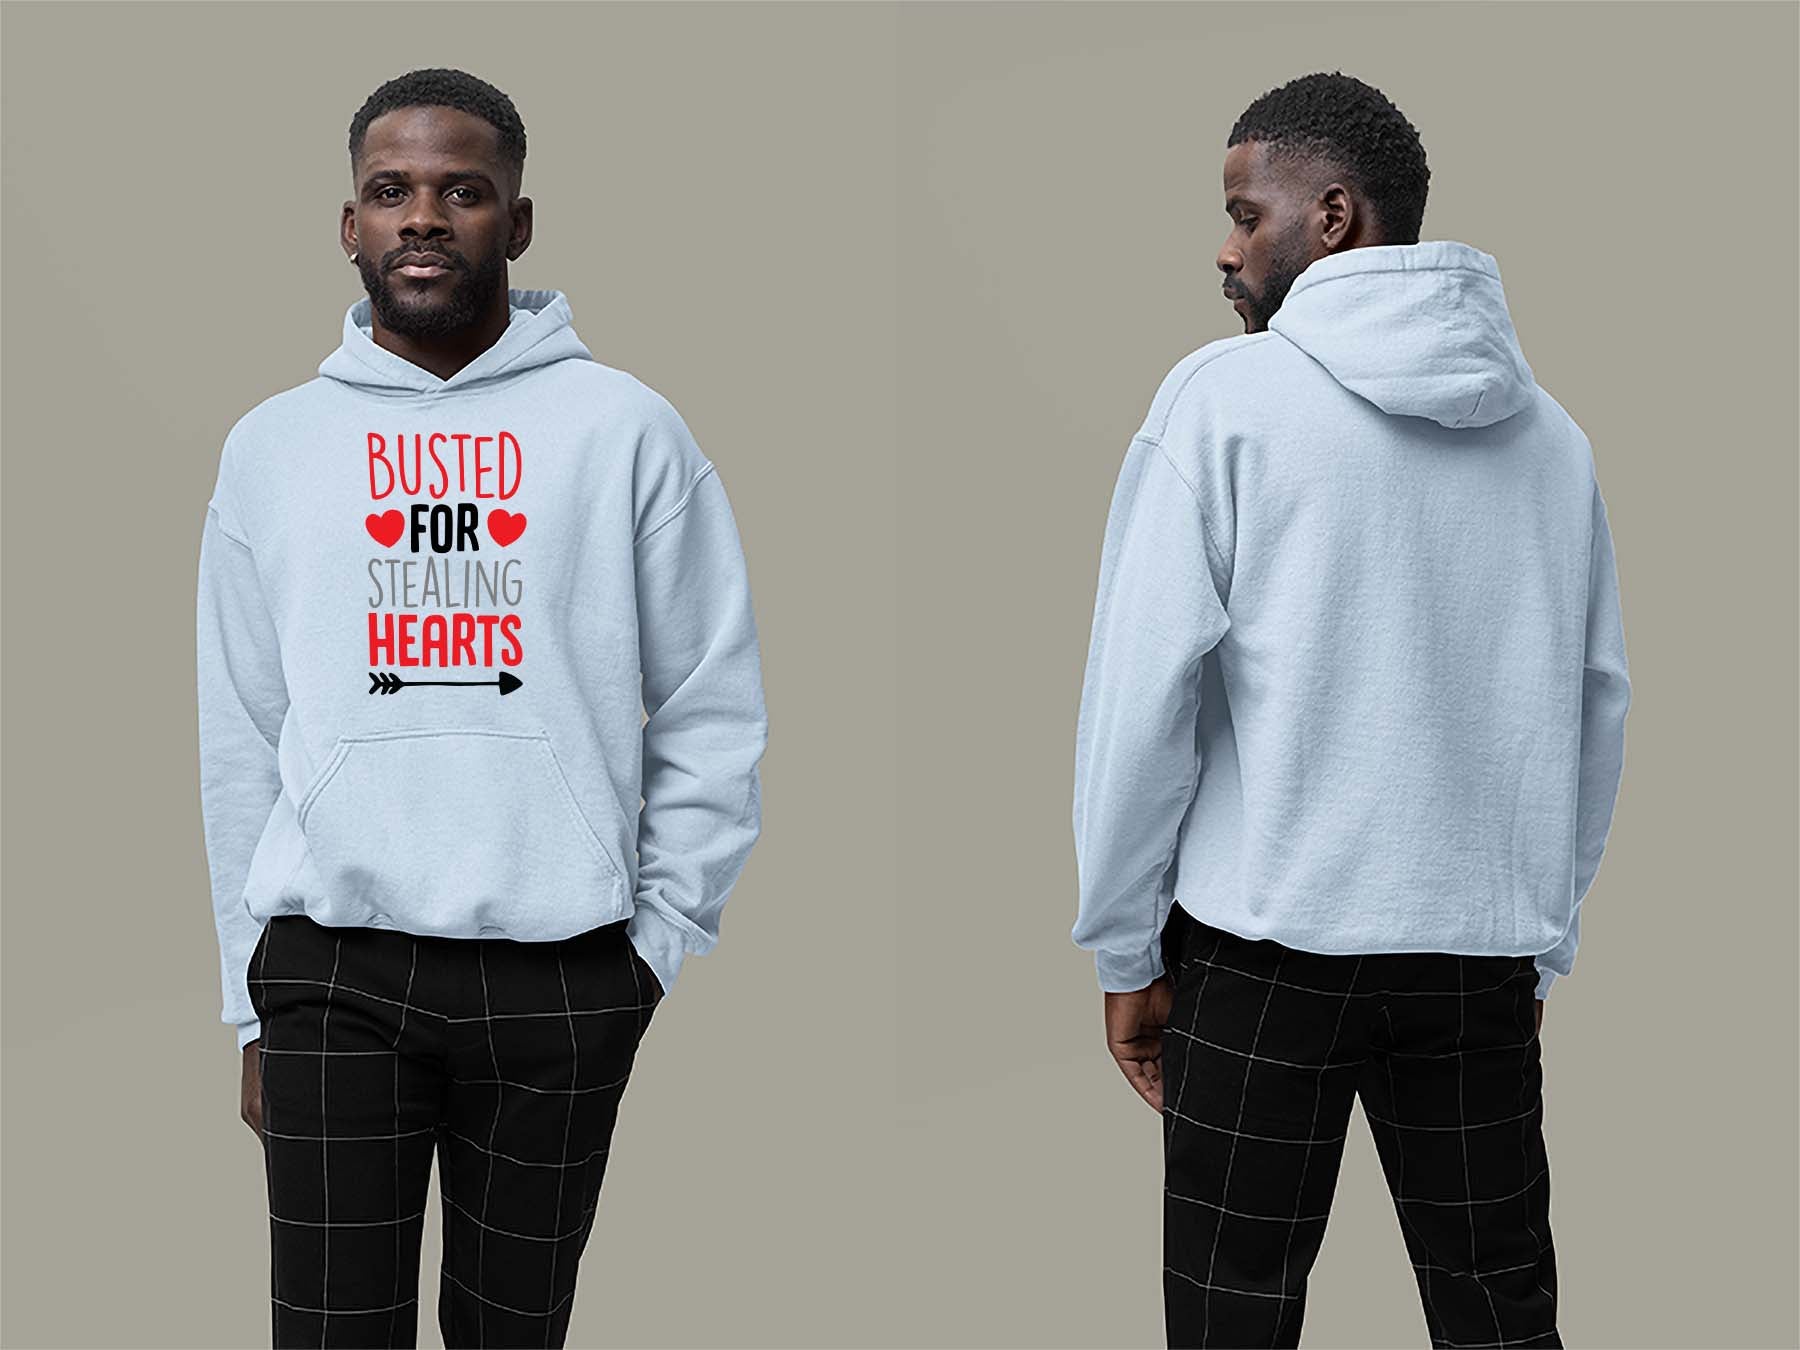 Fat Dave Busted For Stealing Hearts Hoodie Small Light Blue